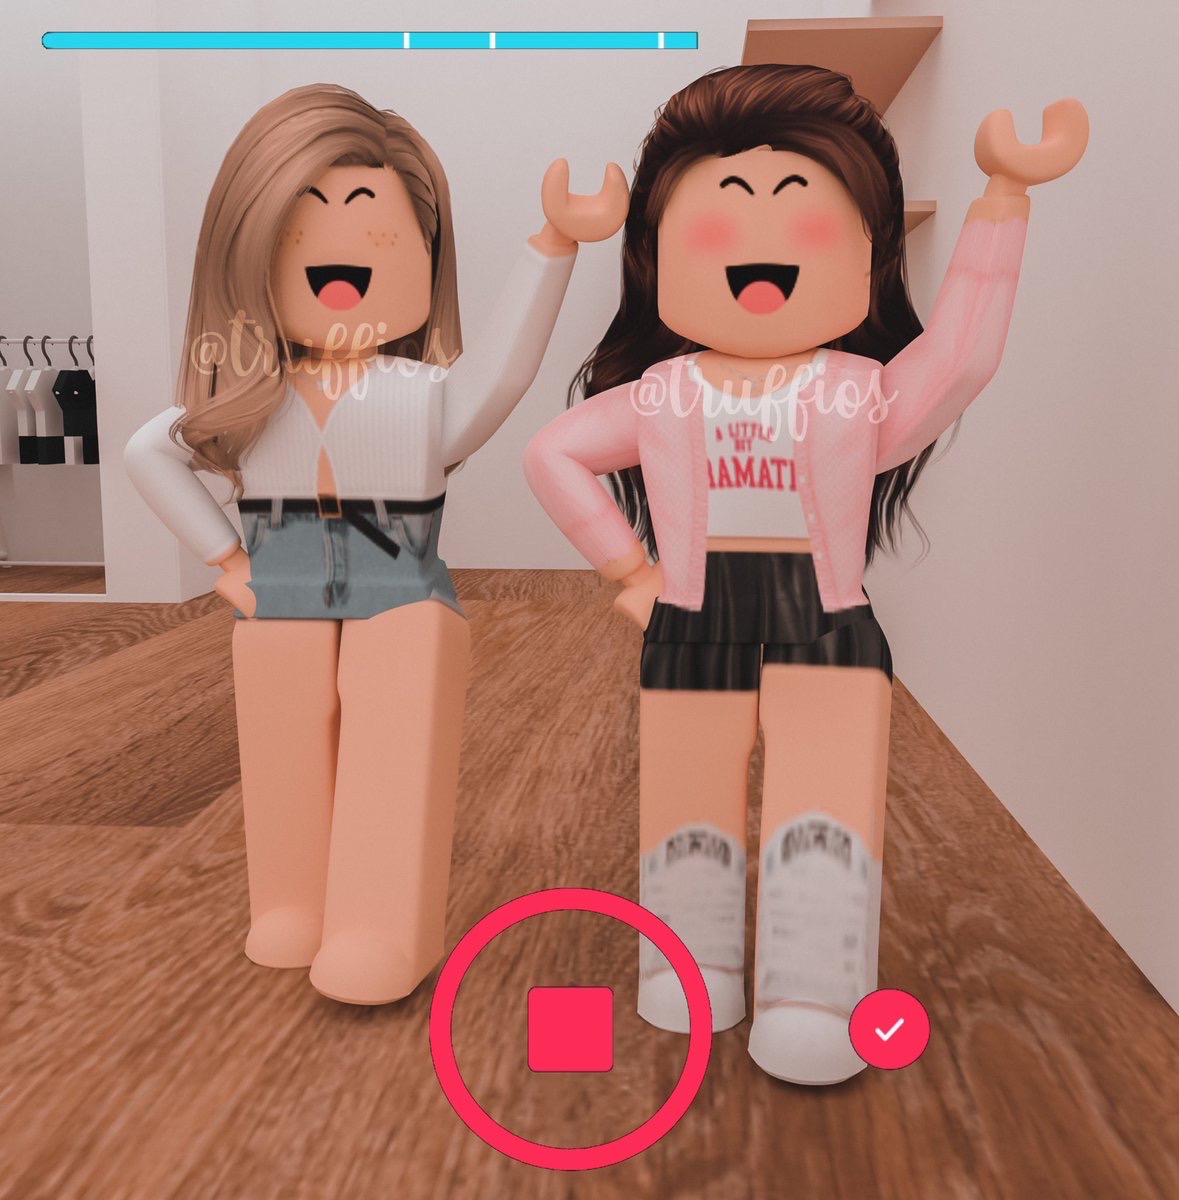 Aesthetic Cute Roblox Girl Image By 𝘊𝘩𝘦𝘳𝘳𝘺 - roblox girl pics cute